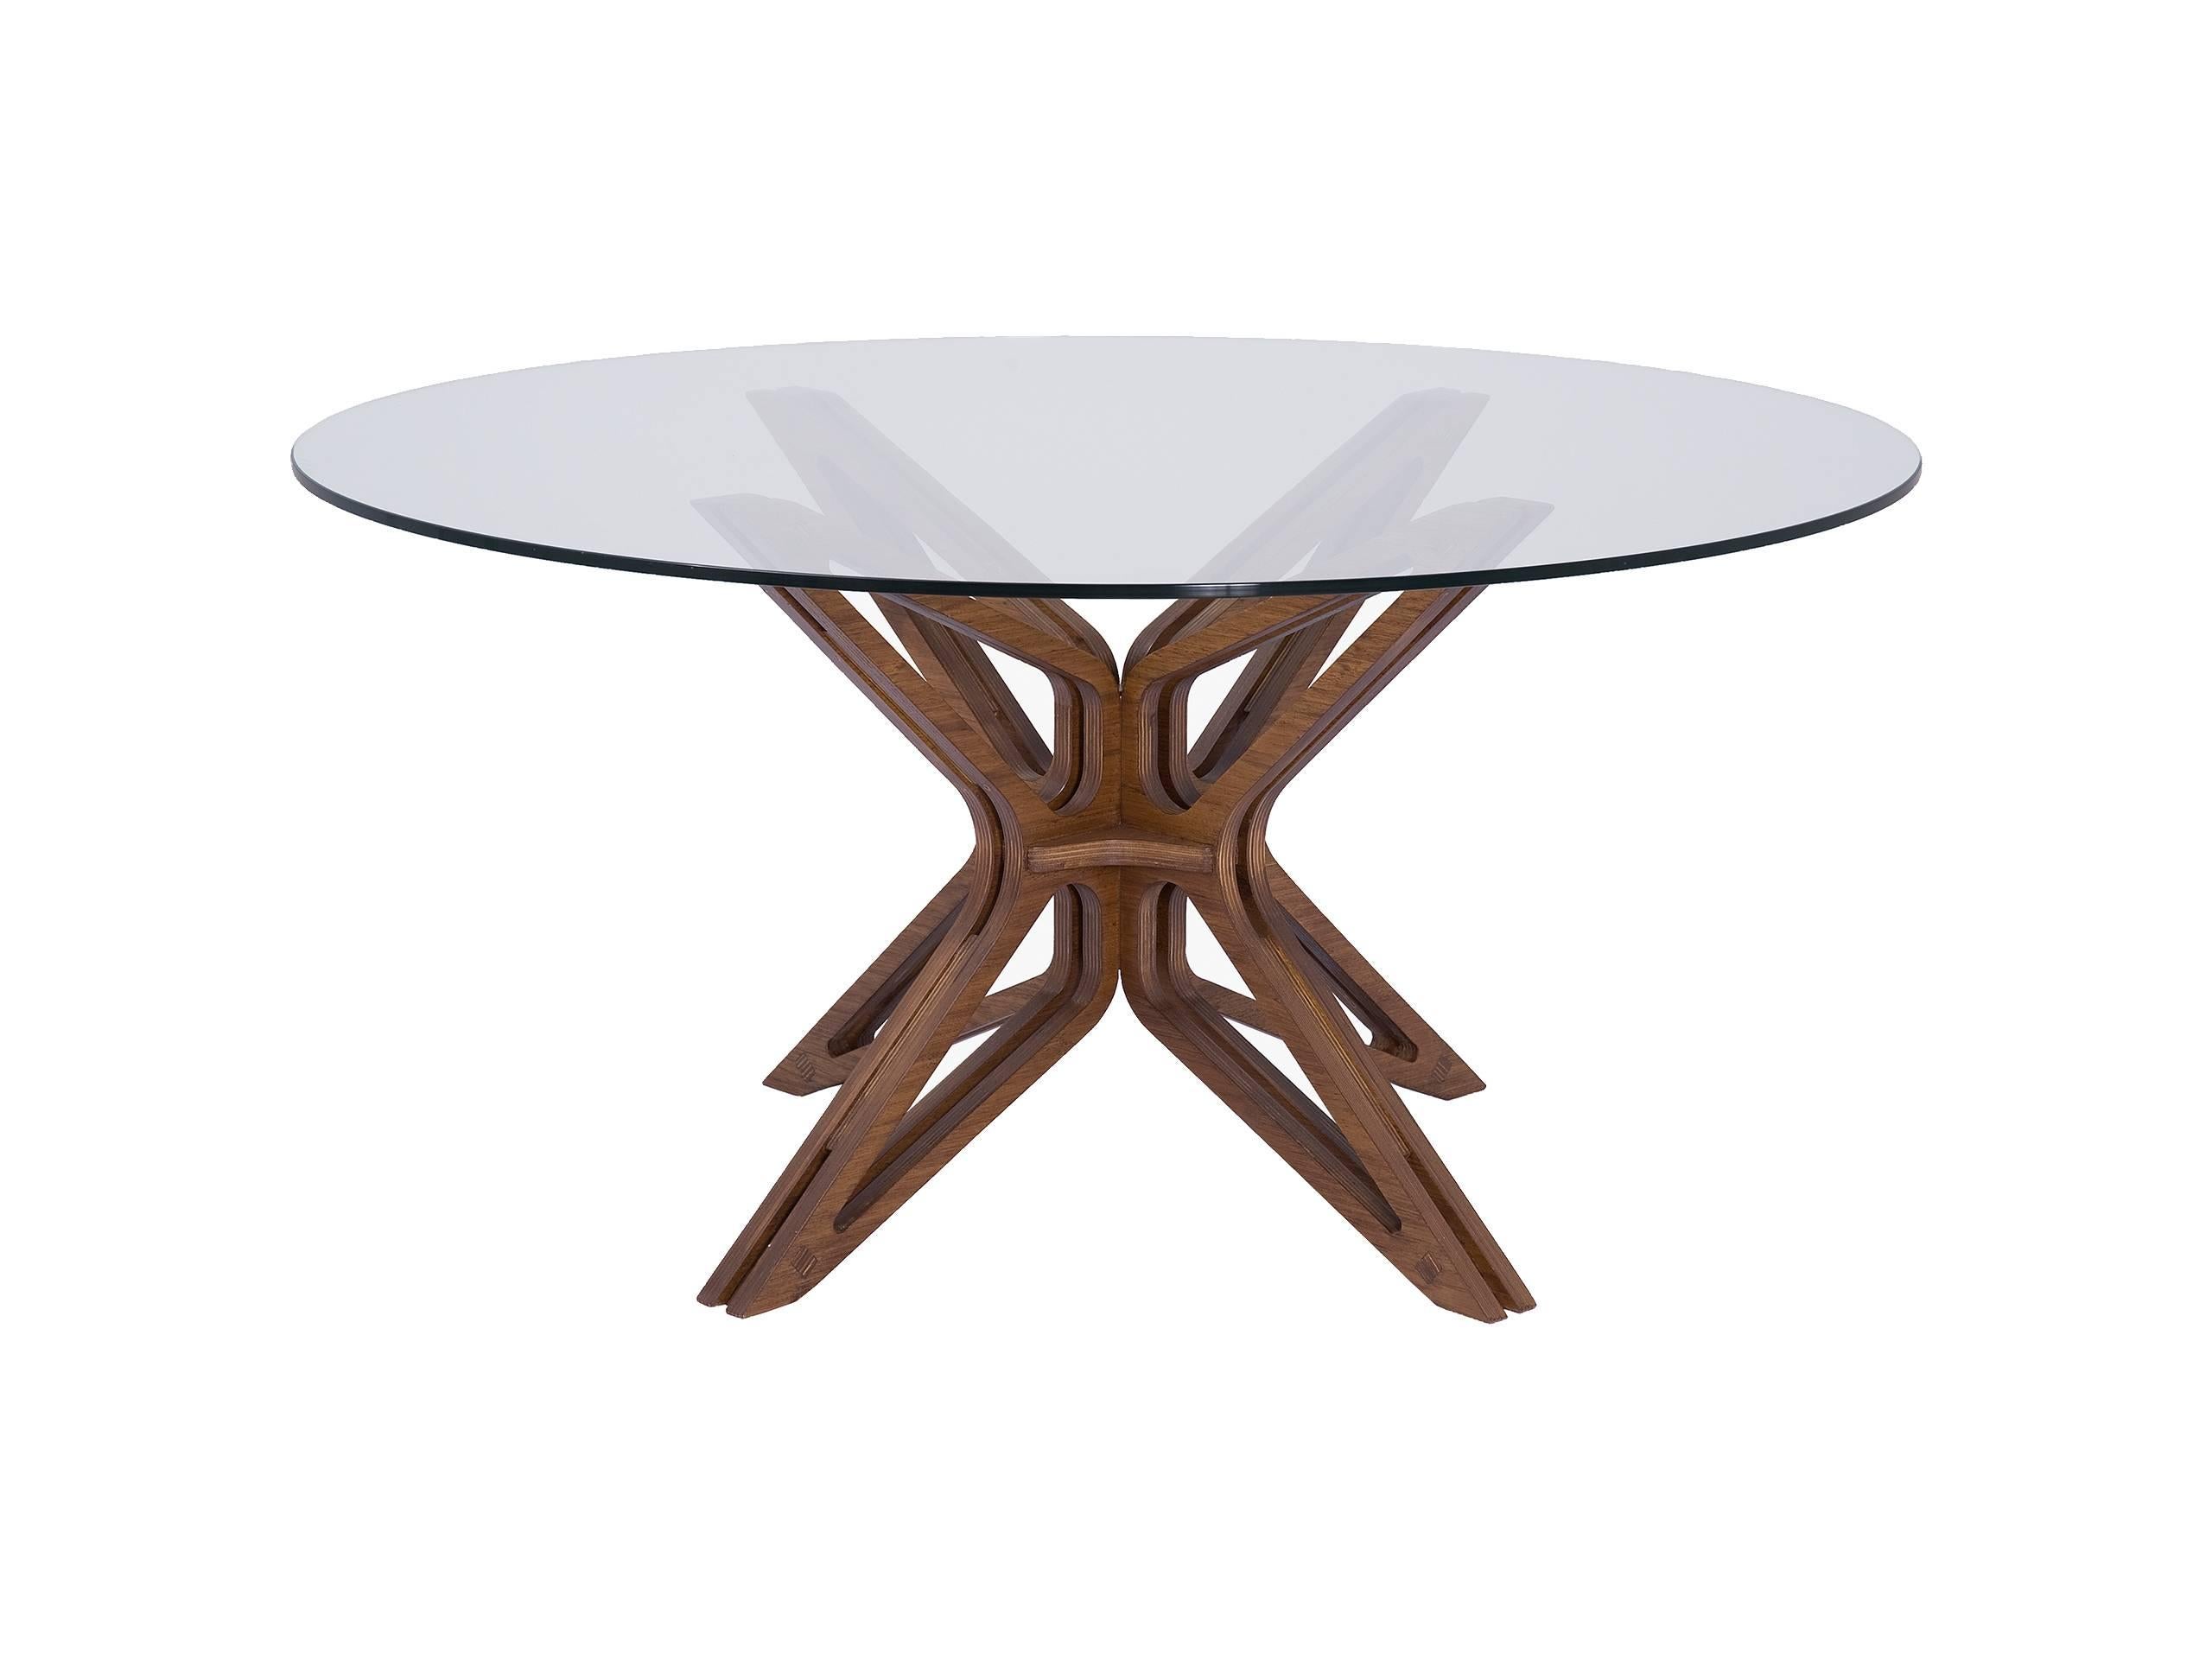 Dining table made of veneer MDF - Its final drawing is a form of open wings of a Moth (Mariposa).

Glass top not included.